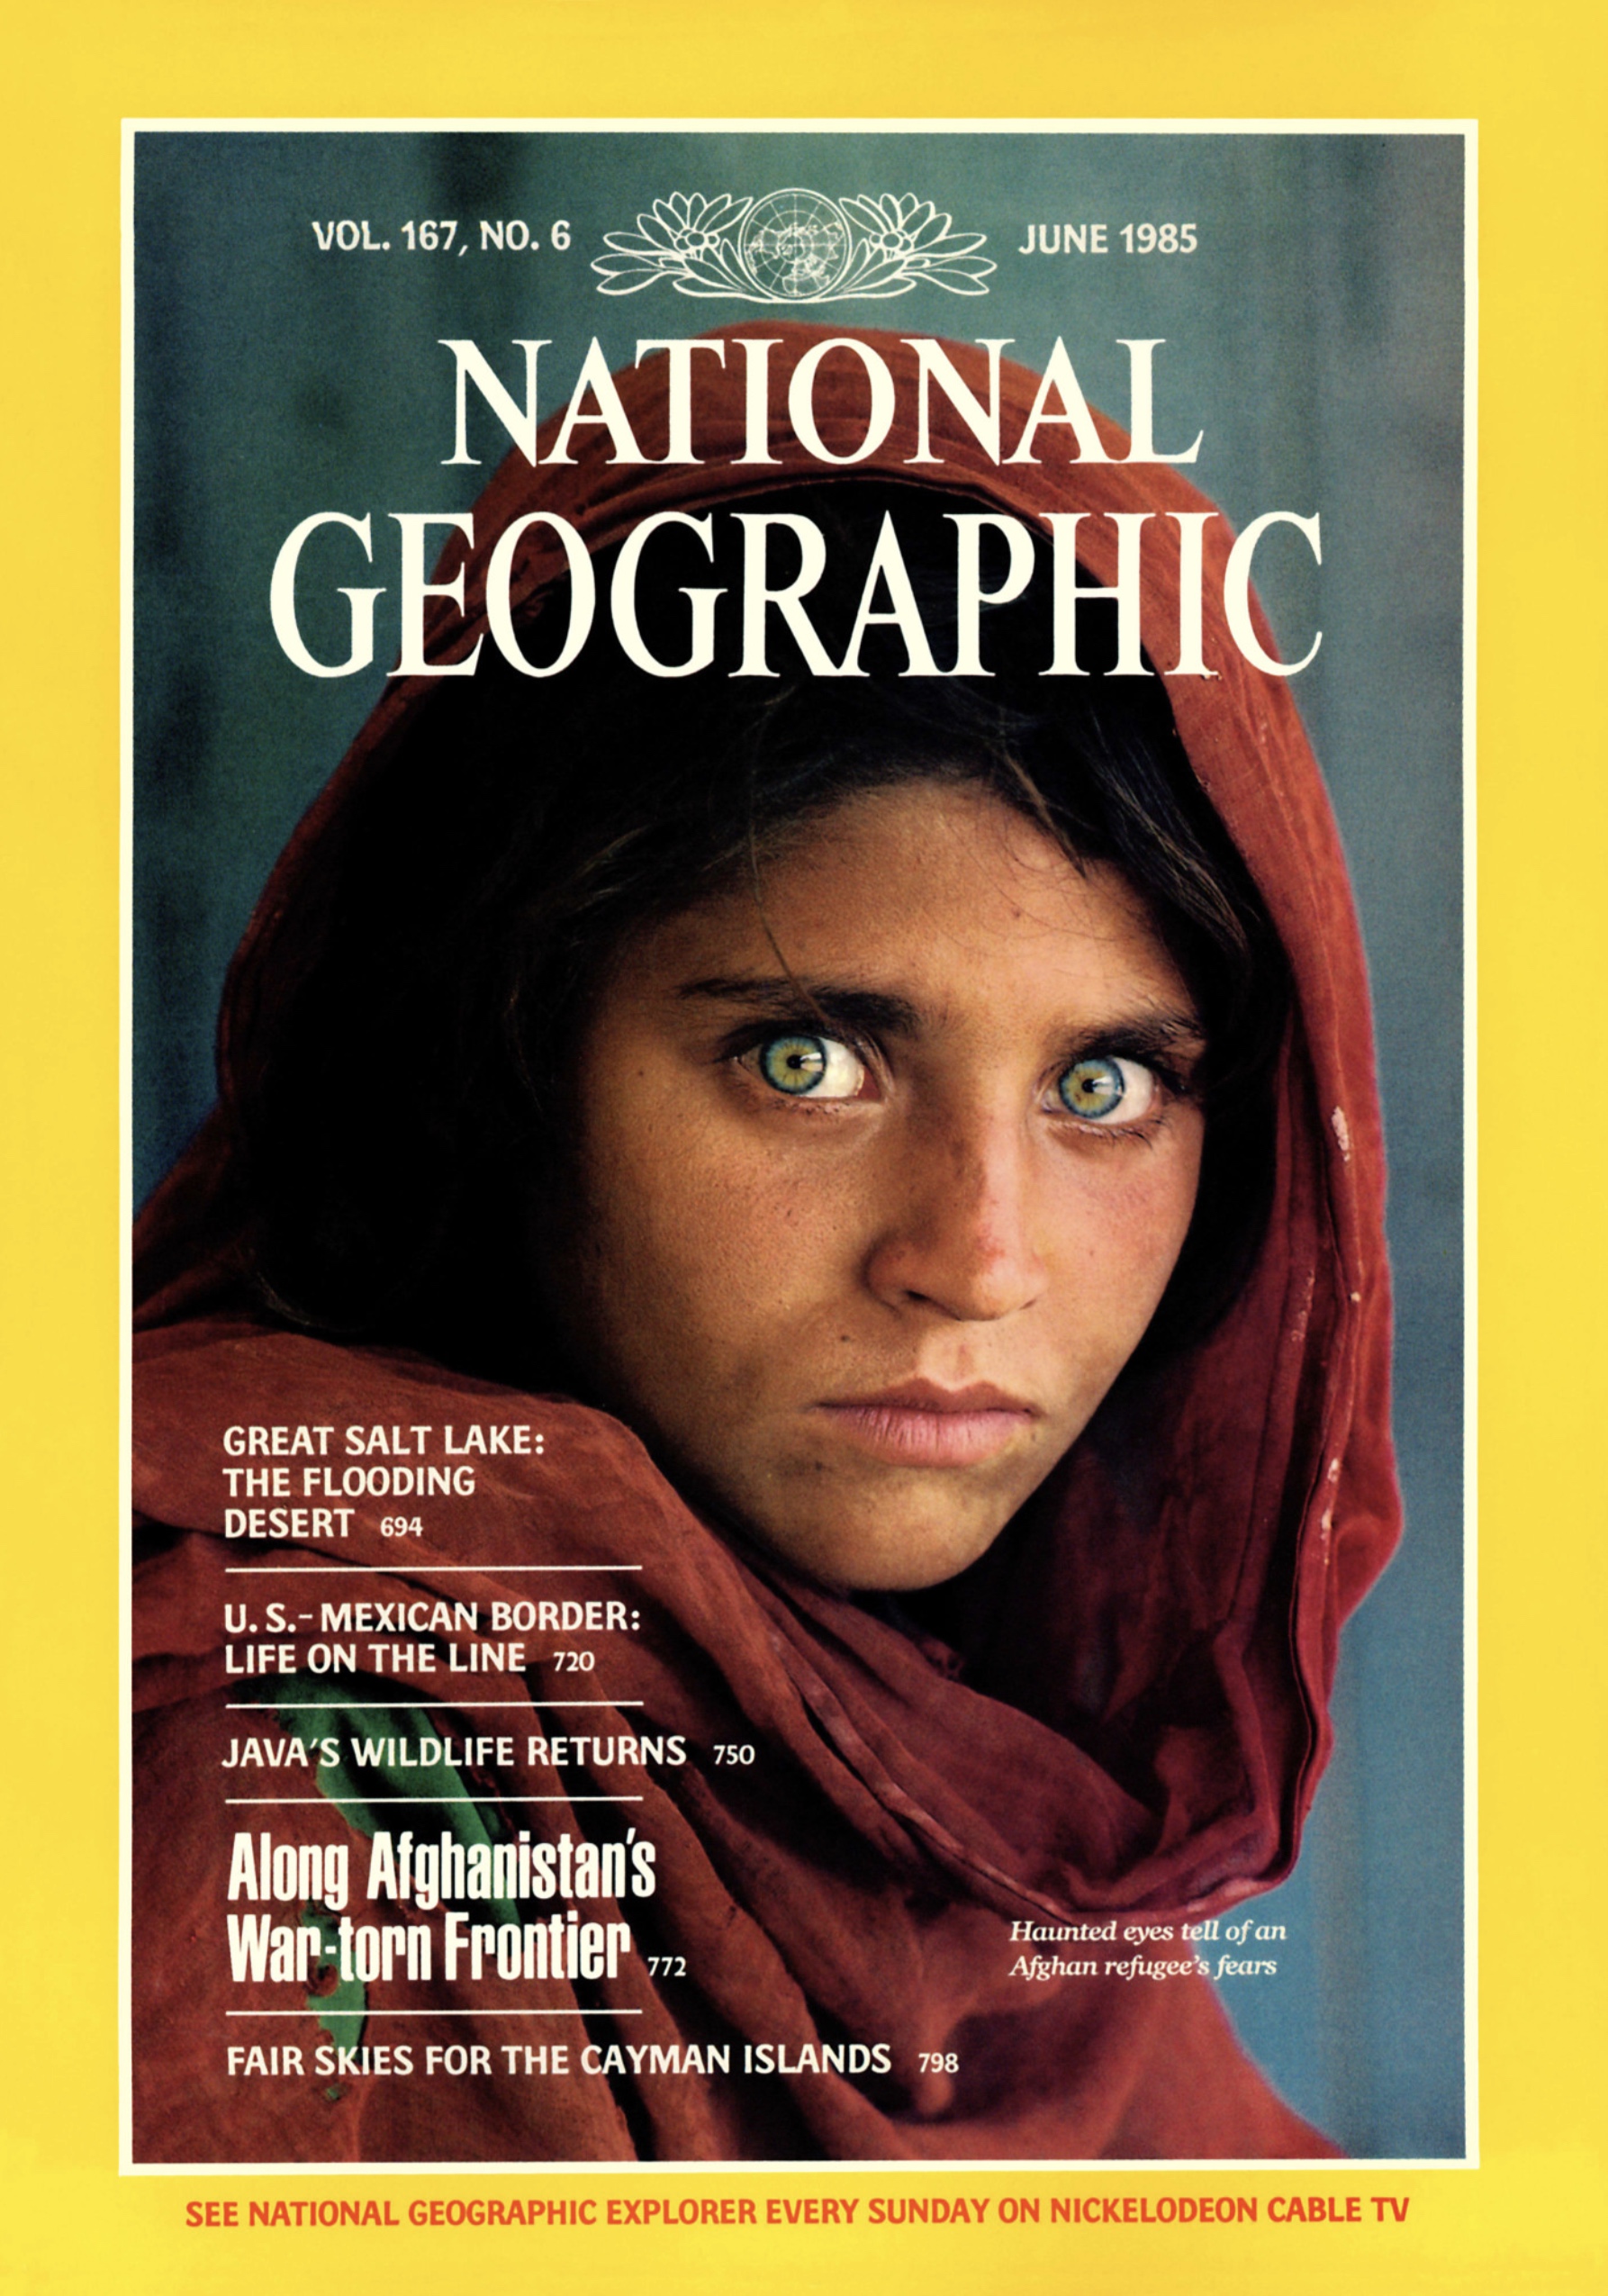 Access 132 years of National Geographic magazine Newton Public Library